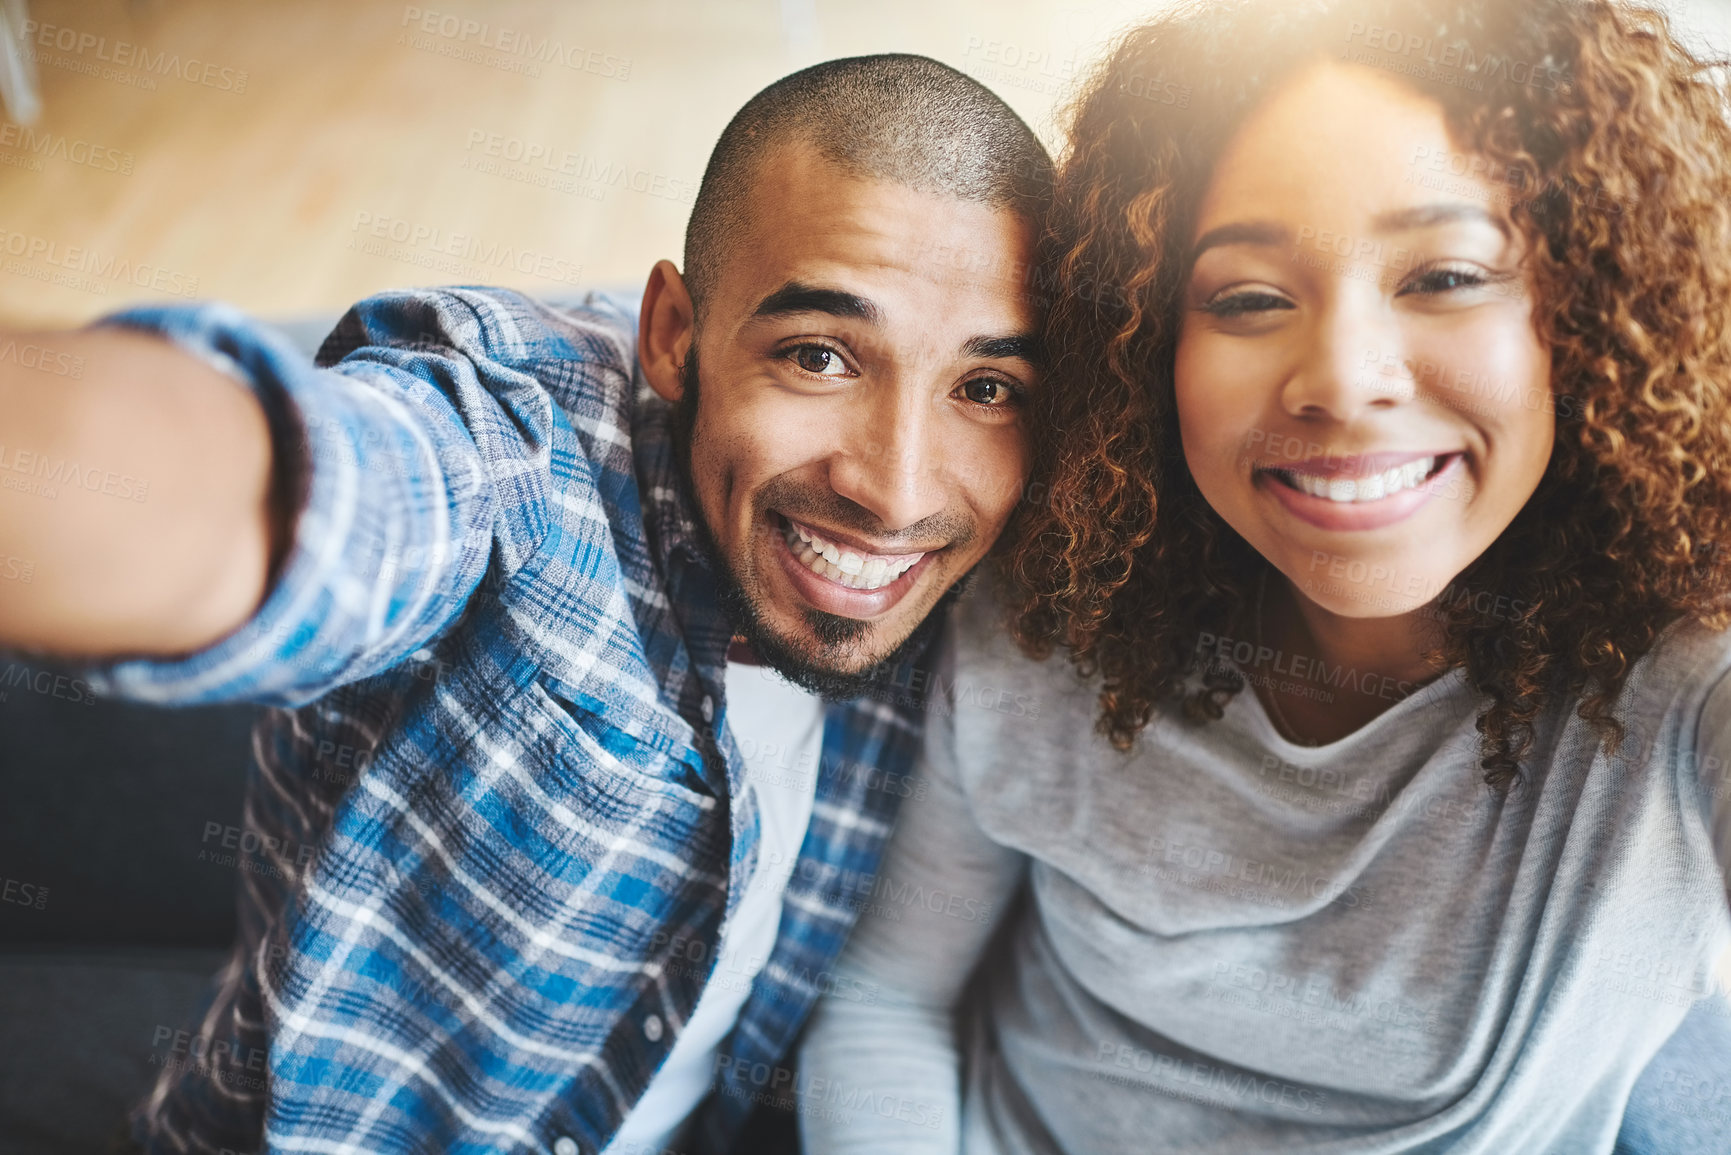 Buy stock photo Happy couple taking selfies as home owners, bonding or enjoying new real estate purchase. Portrait of smiling or proud man and woman celebrating and capturing memory picture as home investors